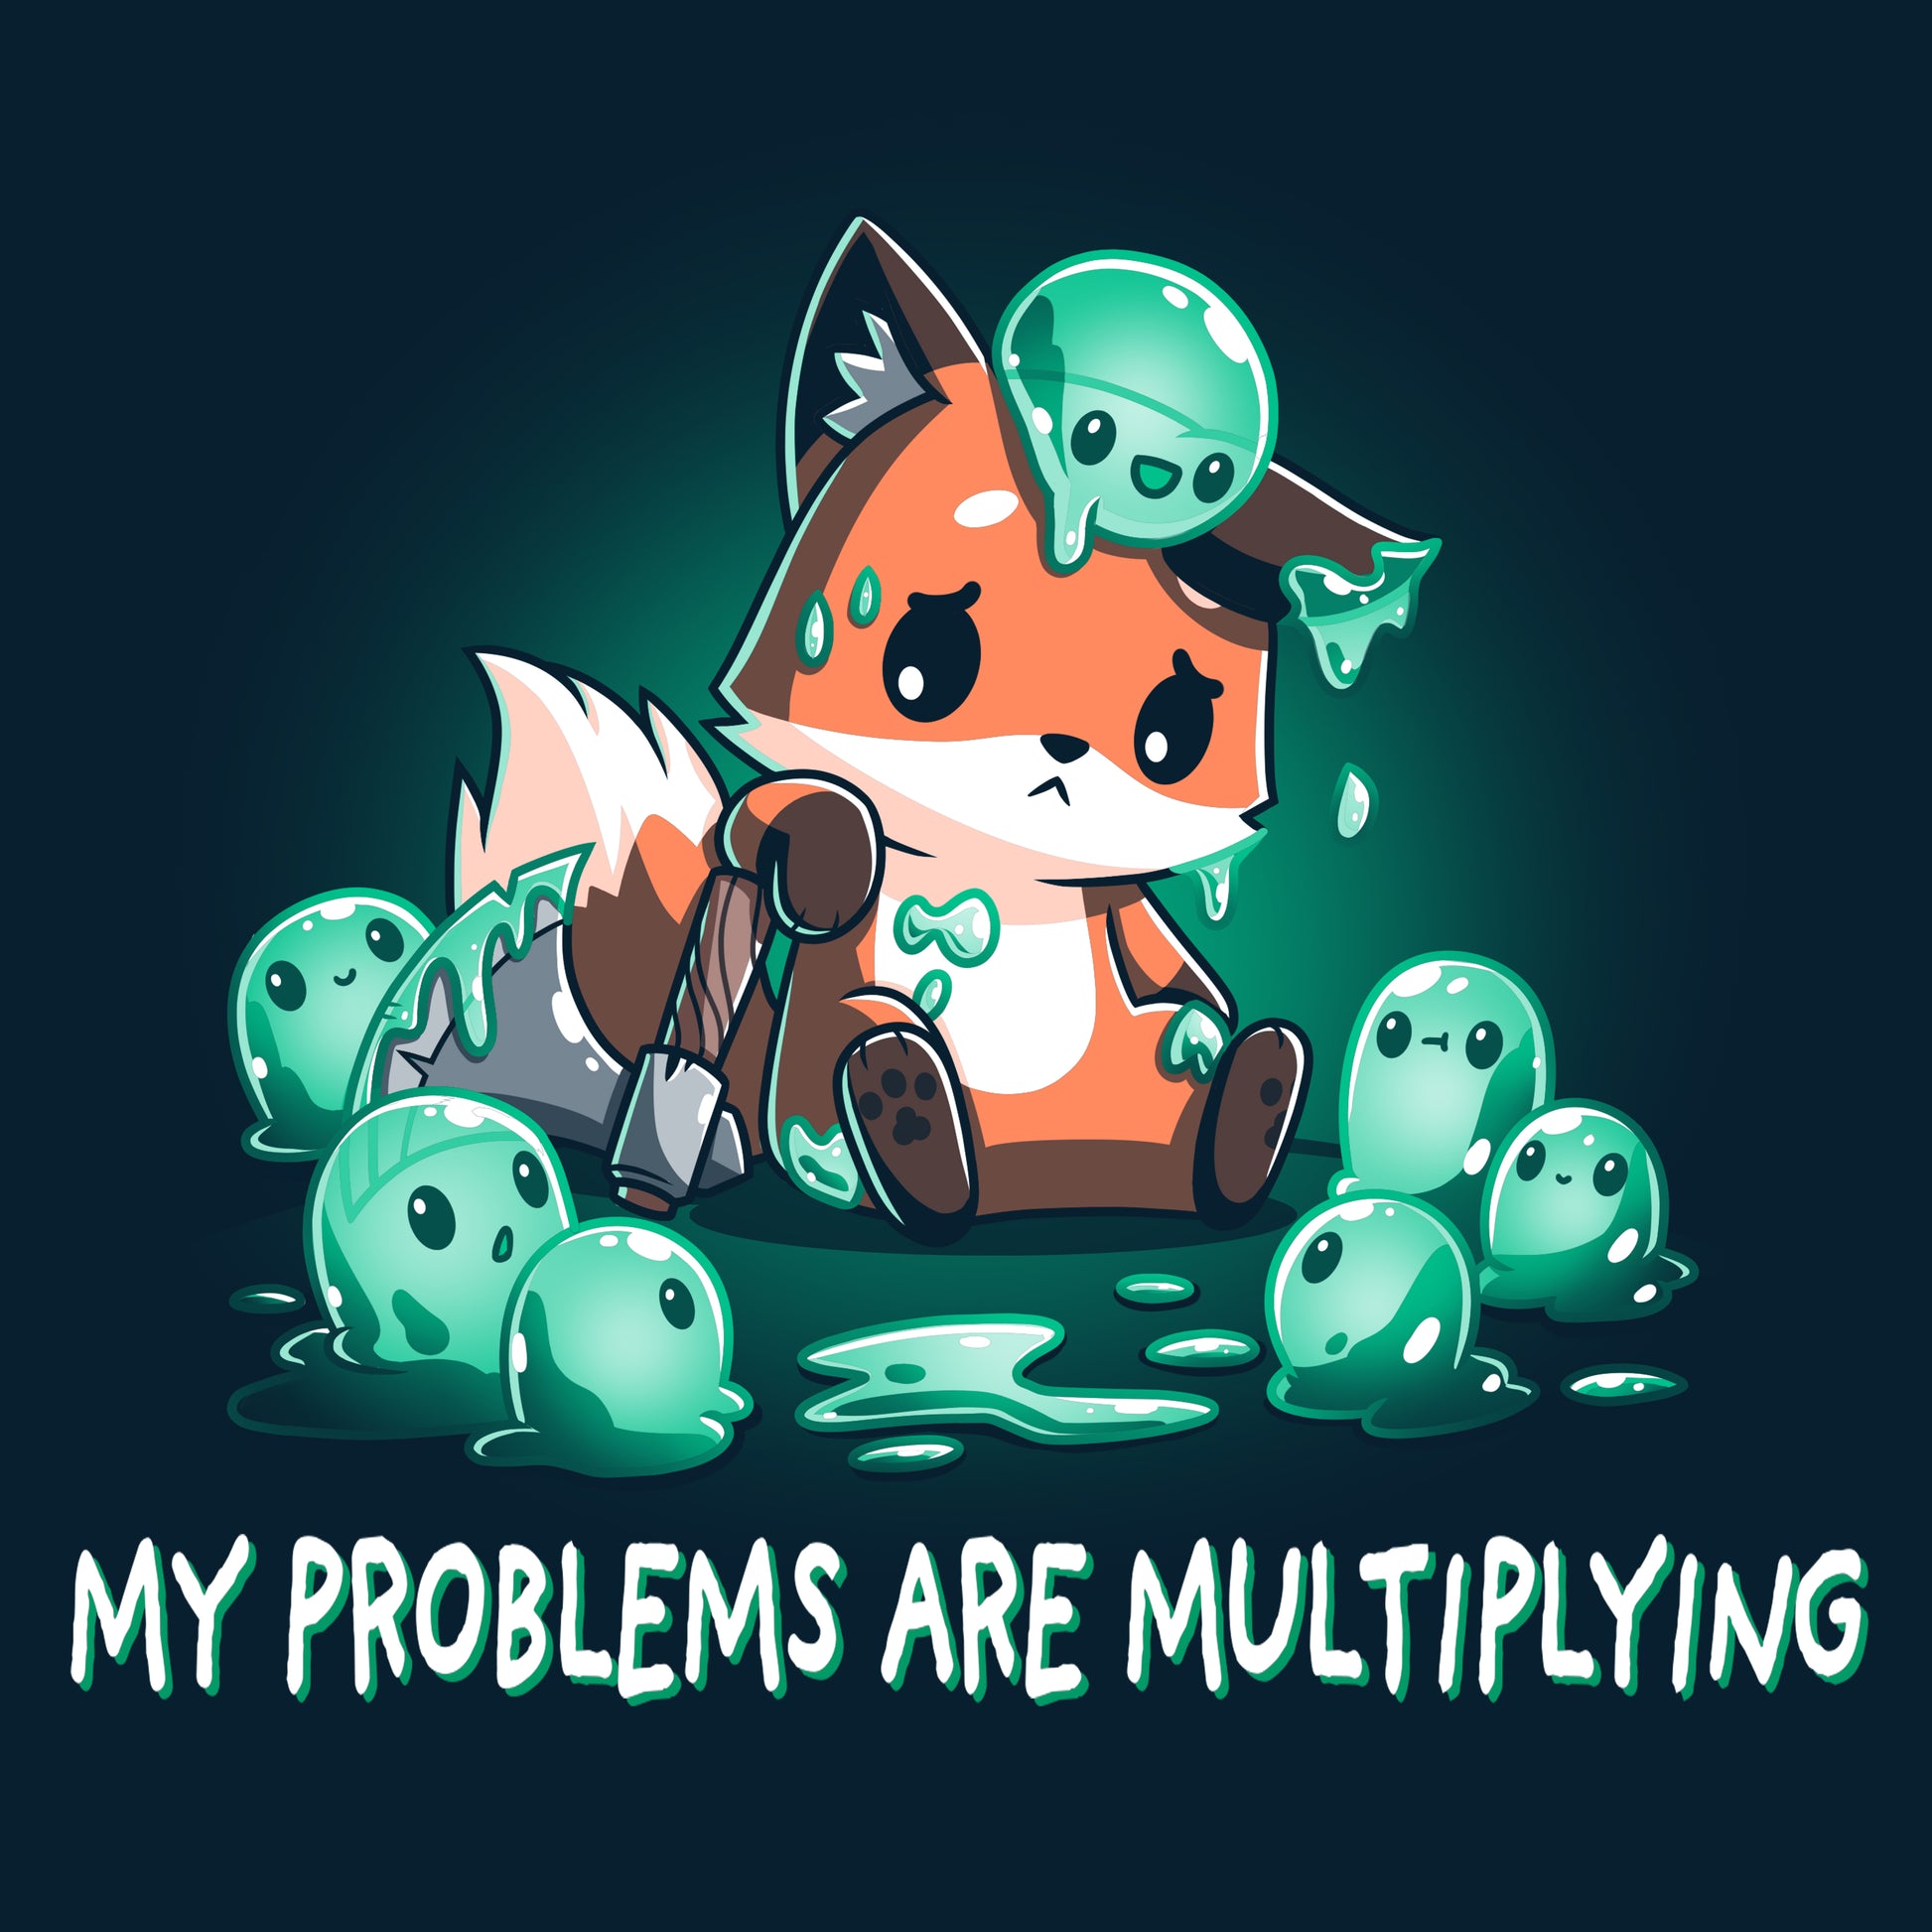 Description: The TeeTurtle Navy t-shirt is causing my problems to multiply.